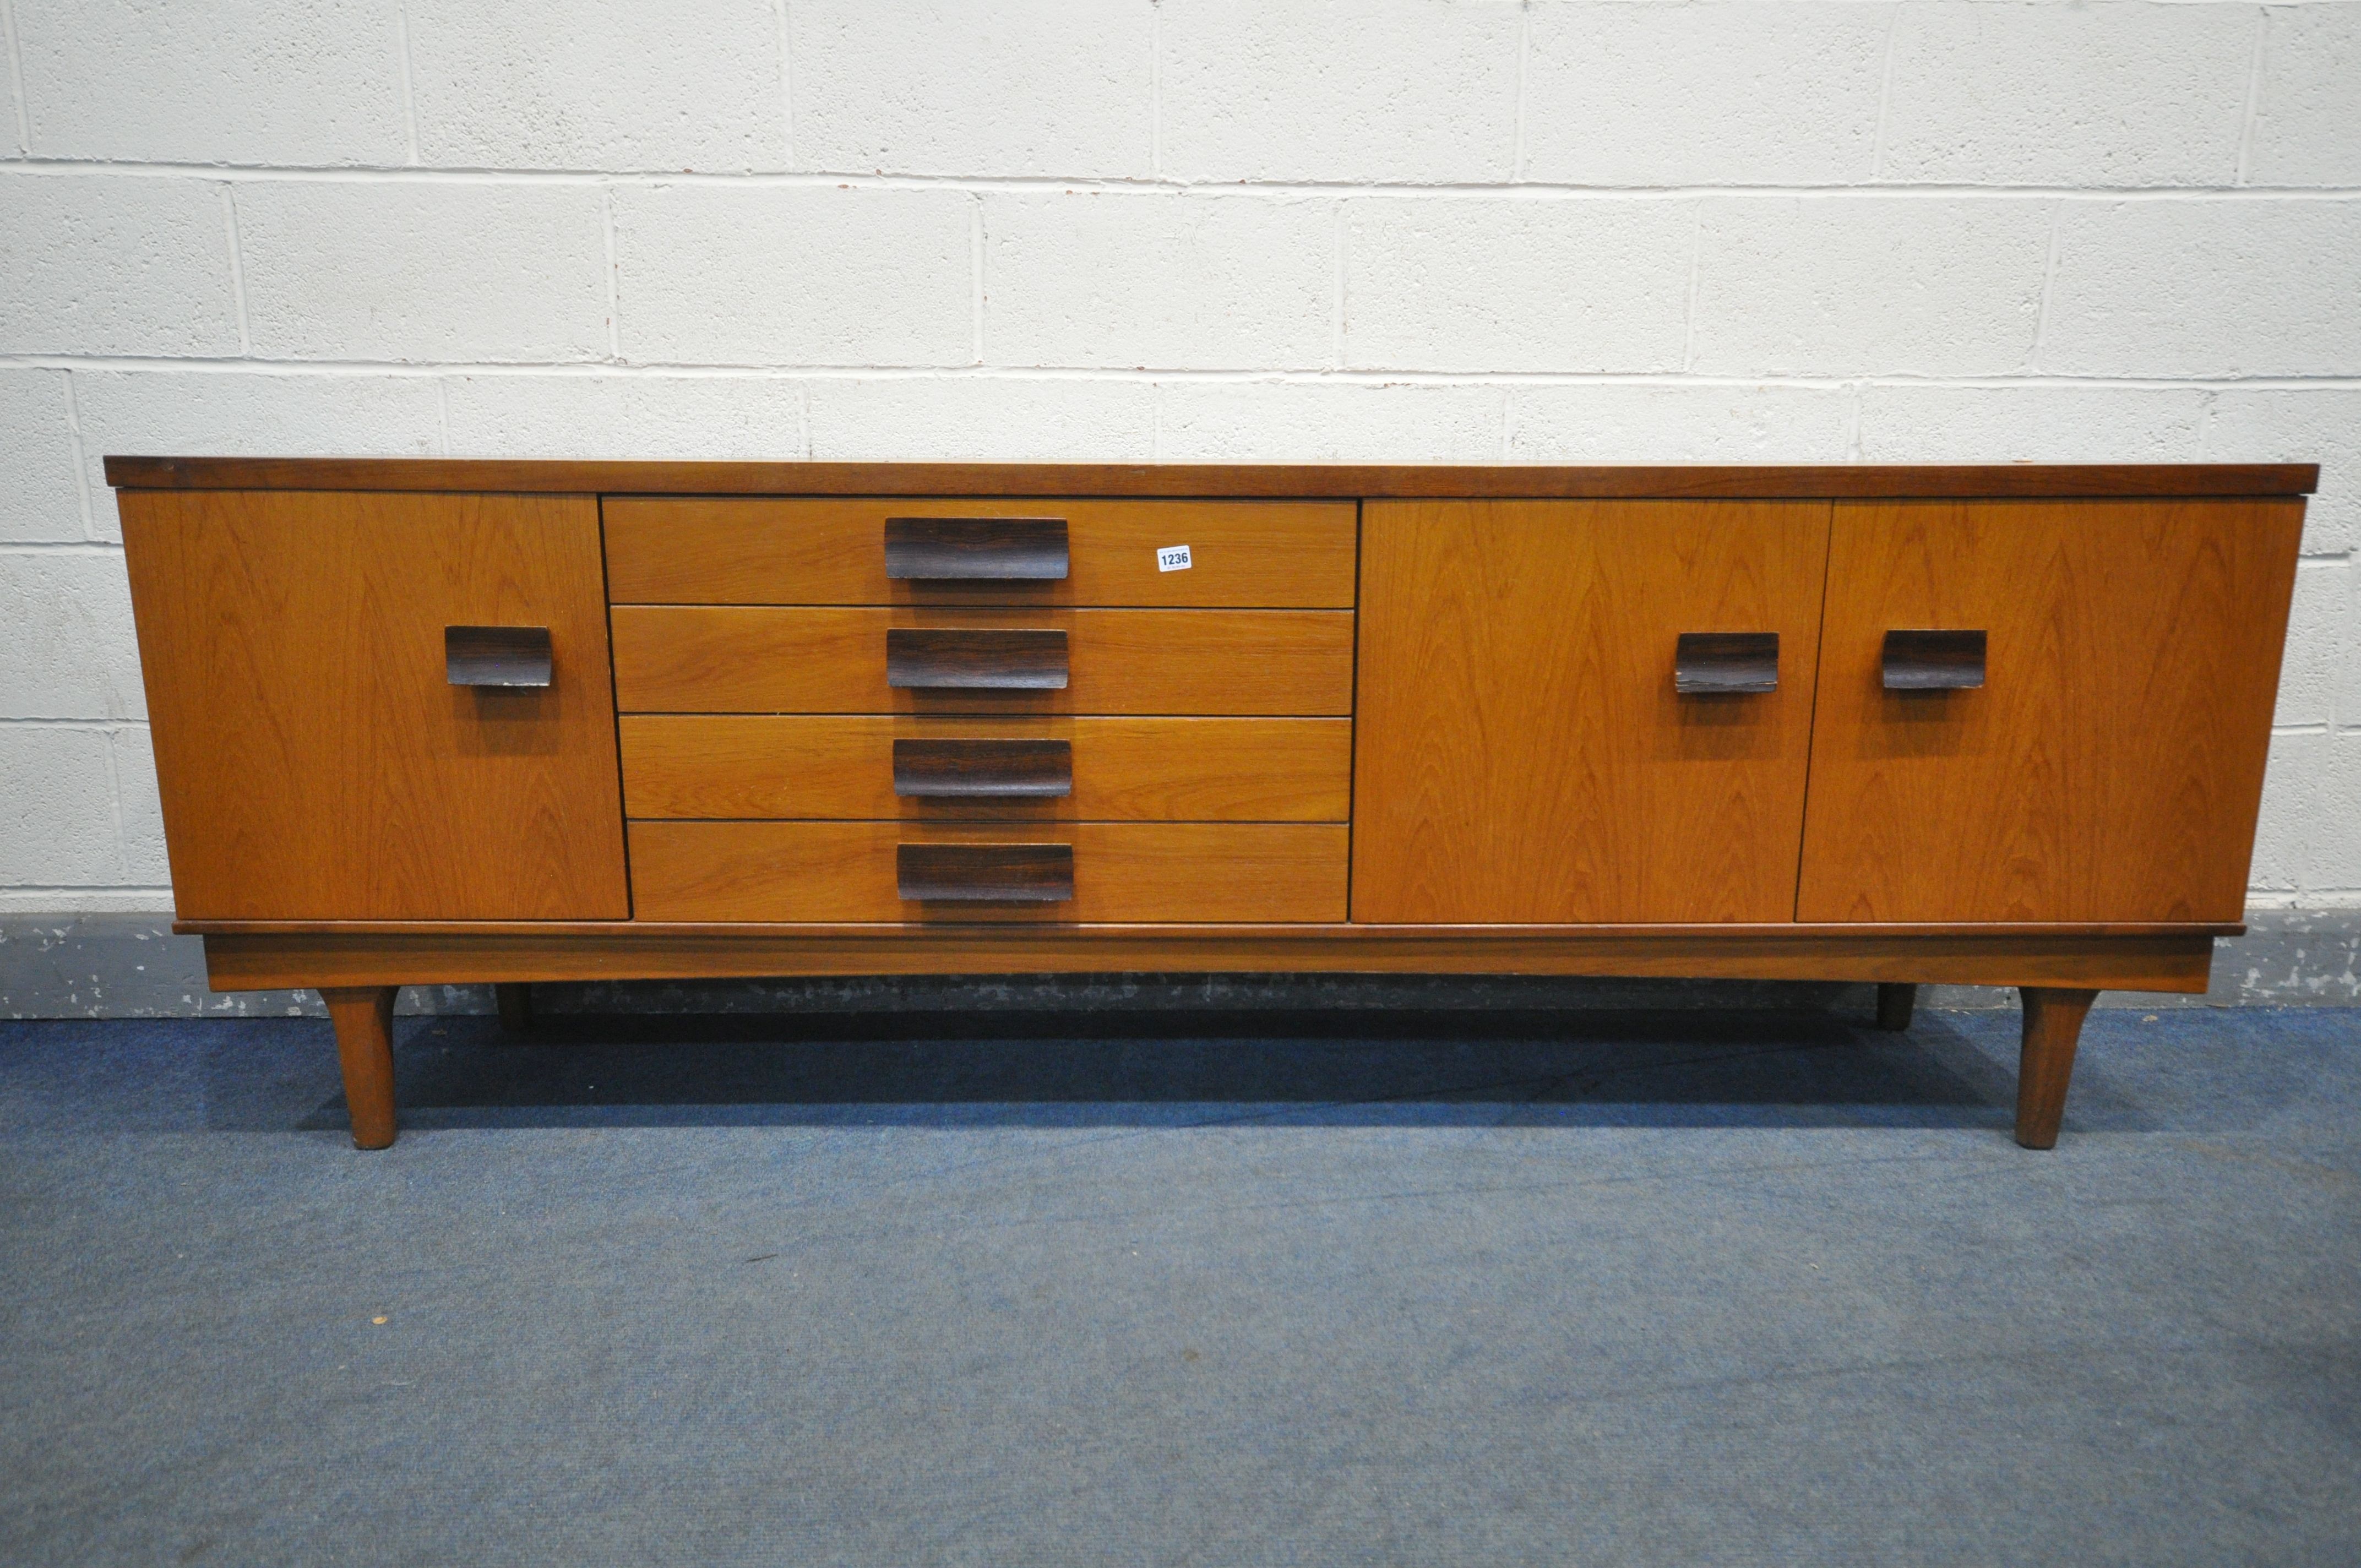 A BATH CABINET MAKERS 1960'S TEAK SIDEABOARD, with a single and double cupboard doors that a both - Image 2 of 3